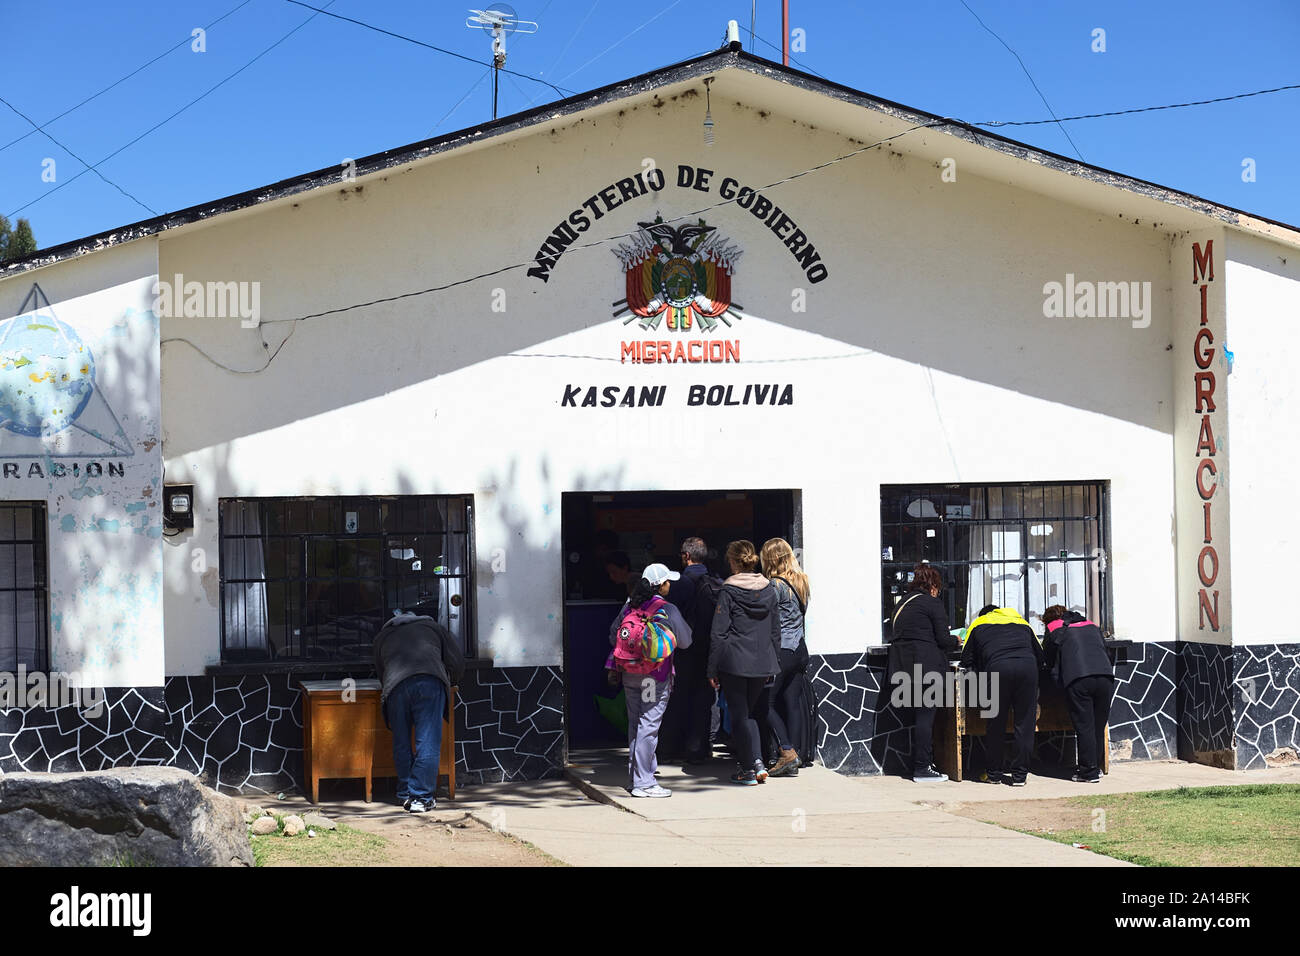 KASANI, BOLIVIA - OCTOBER 10, 2014: Unidentified people standing in line in front of the migration office on the Bolivian side of the border in Kasani Stock Photo